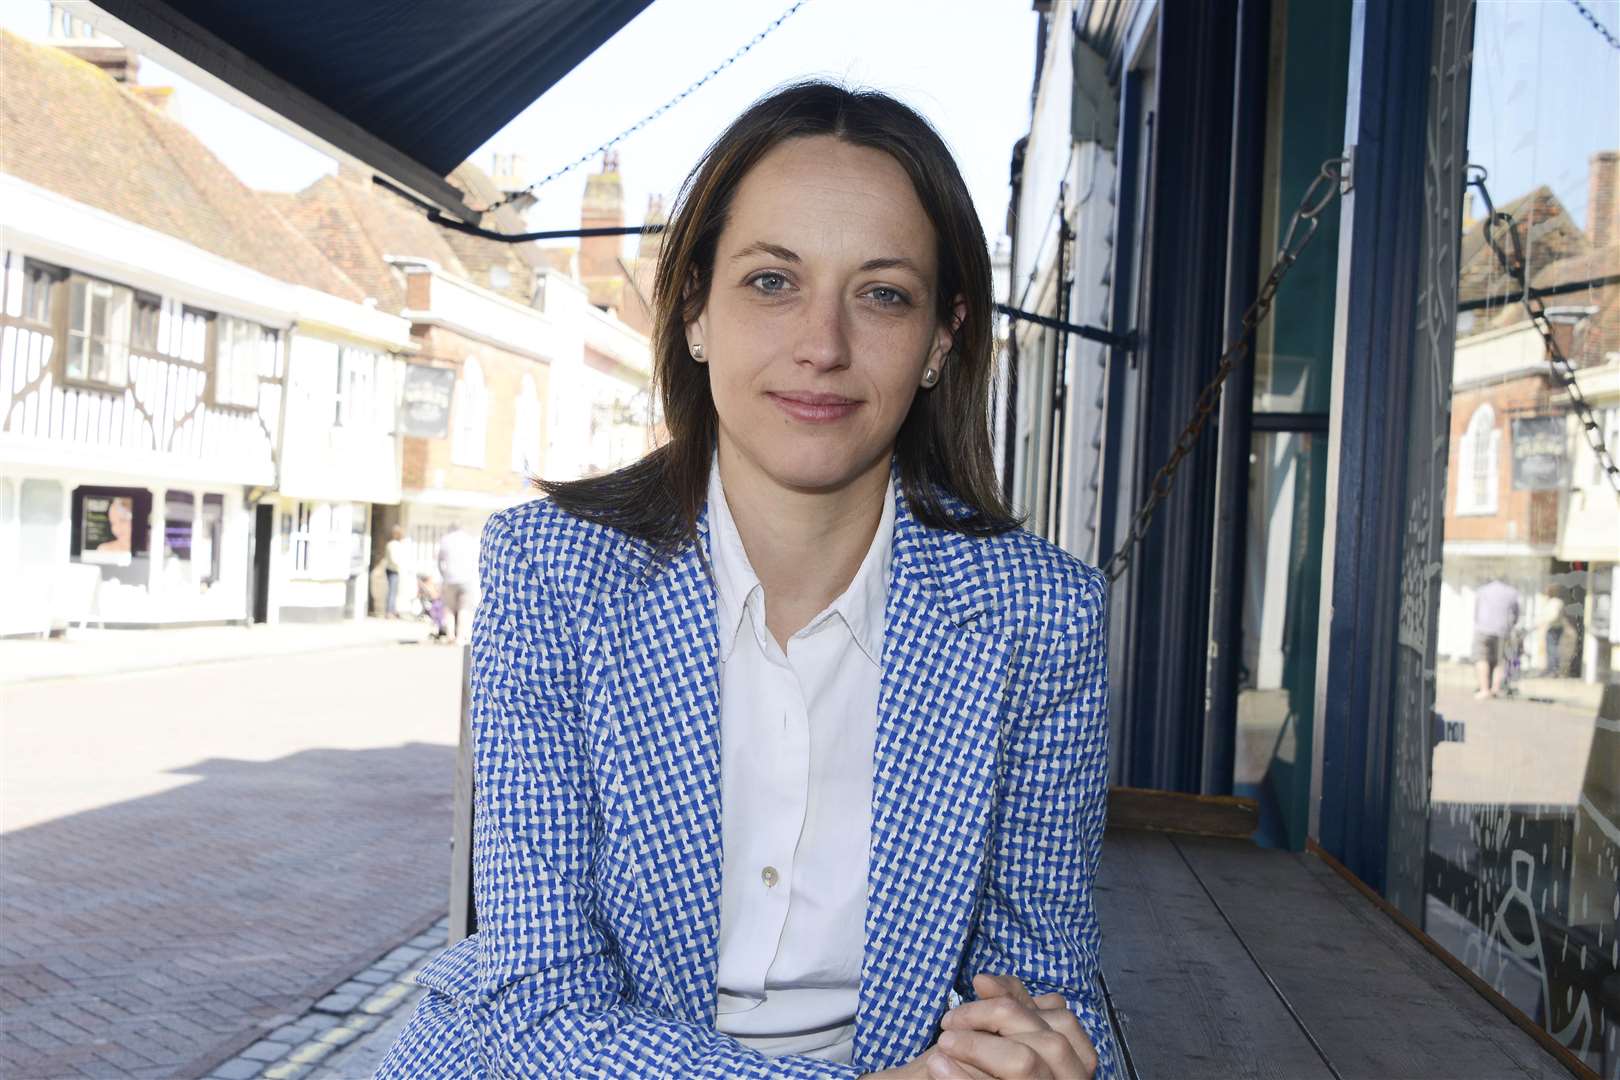 Faversham candidate Helen Whately. Picture: Paul Amos